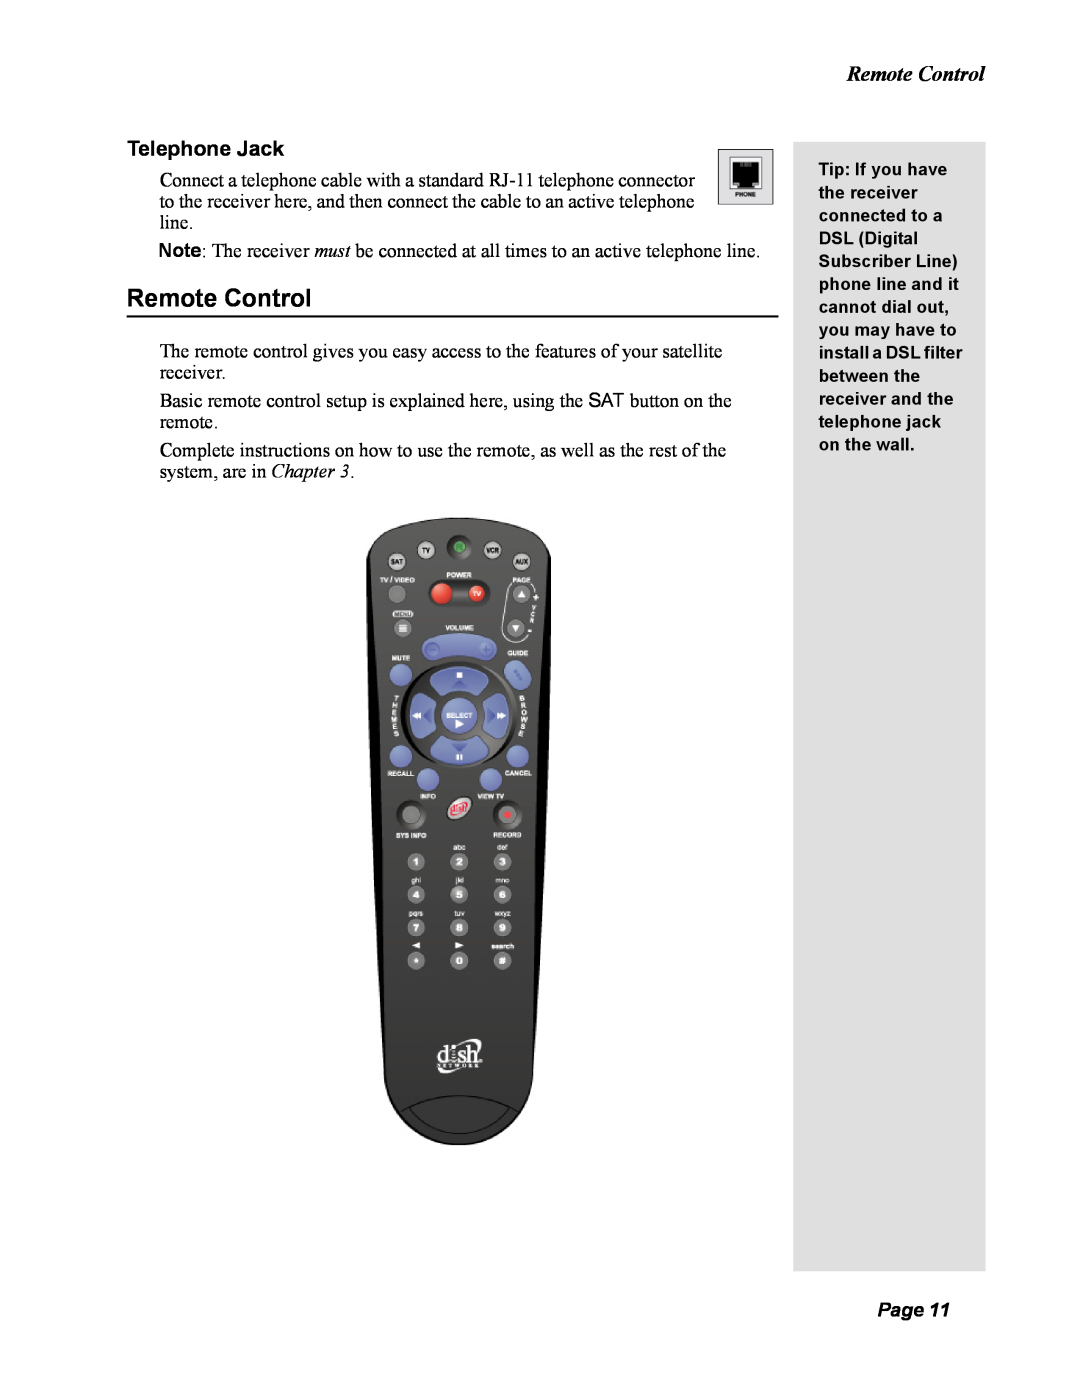 Dish Network DISH 351 manual Remote Control, Telephone Jack, Page 